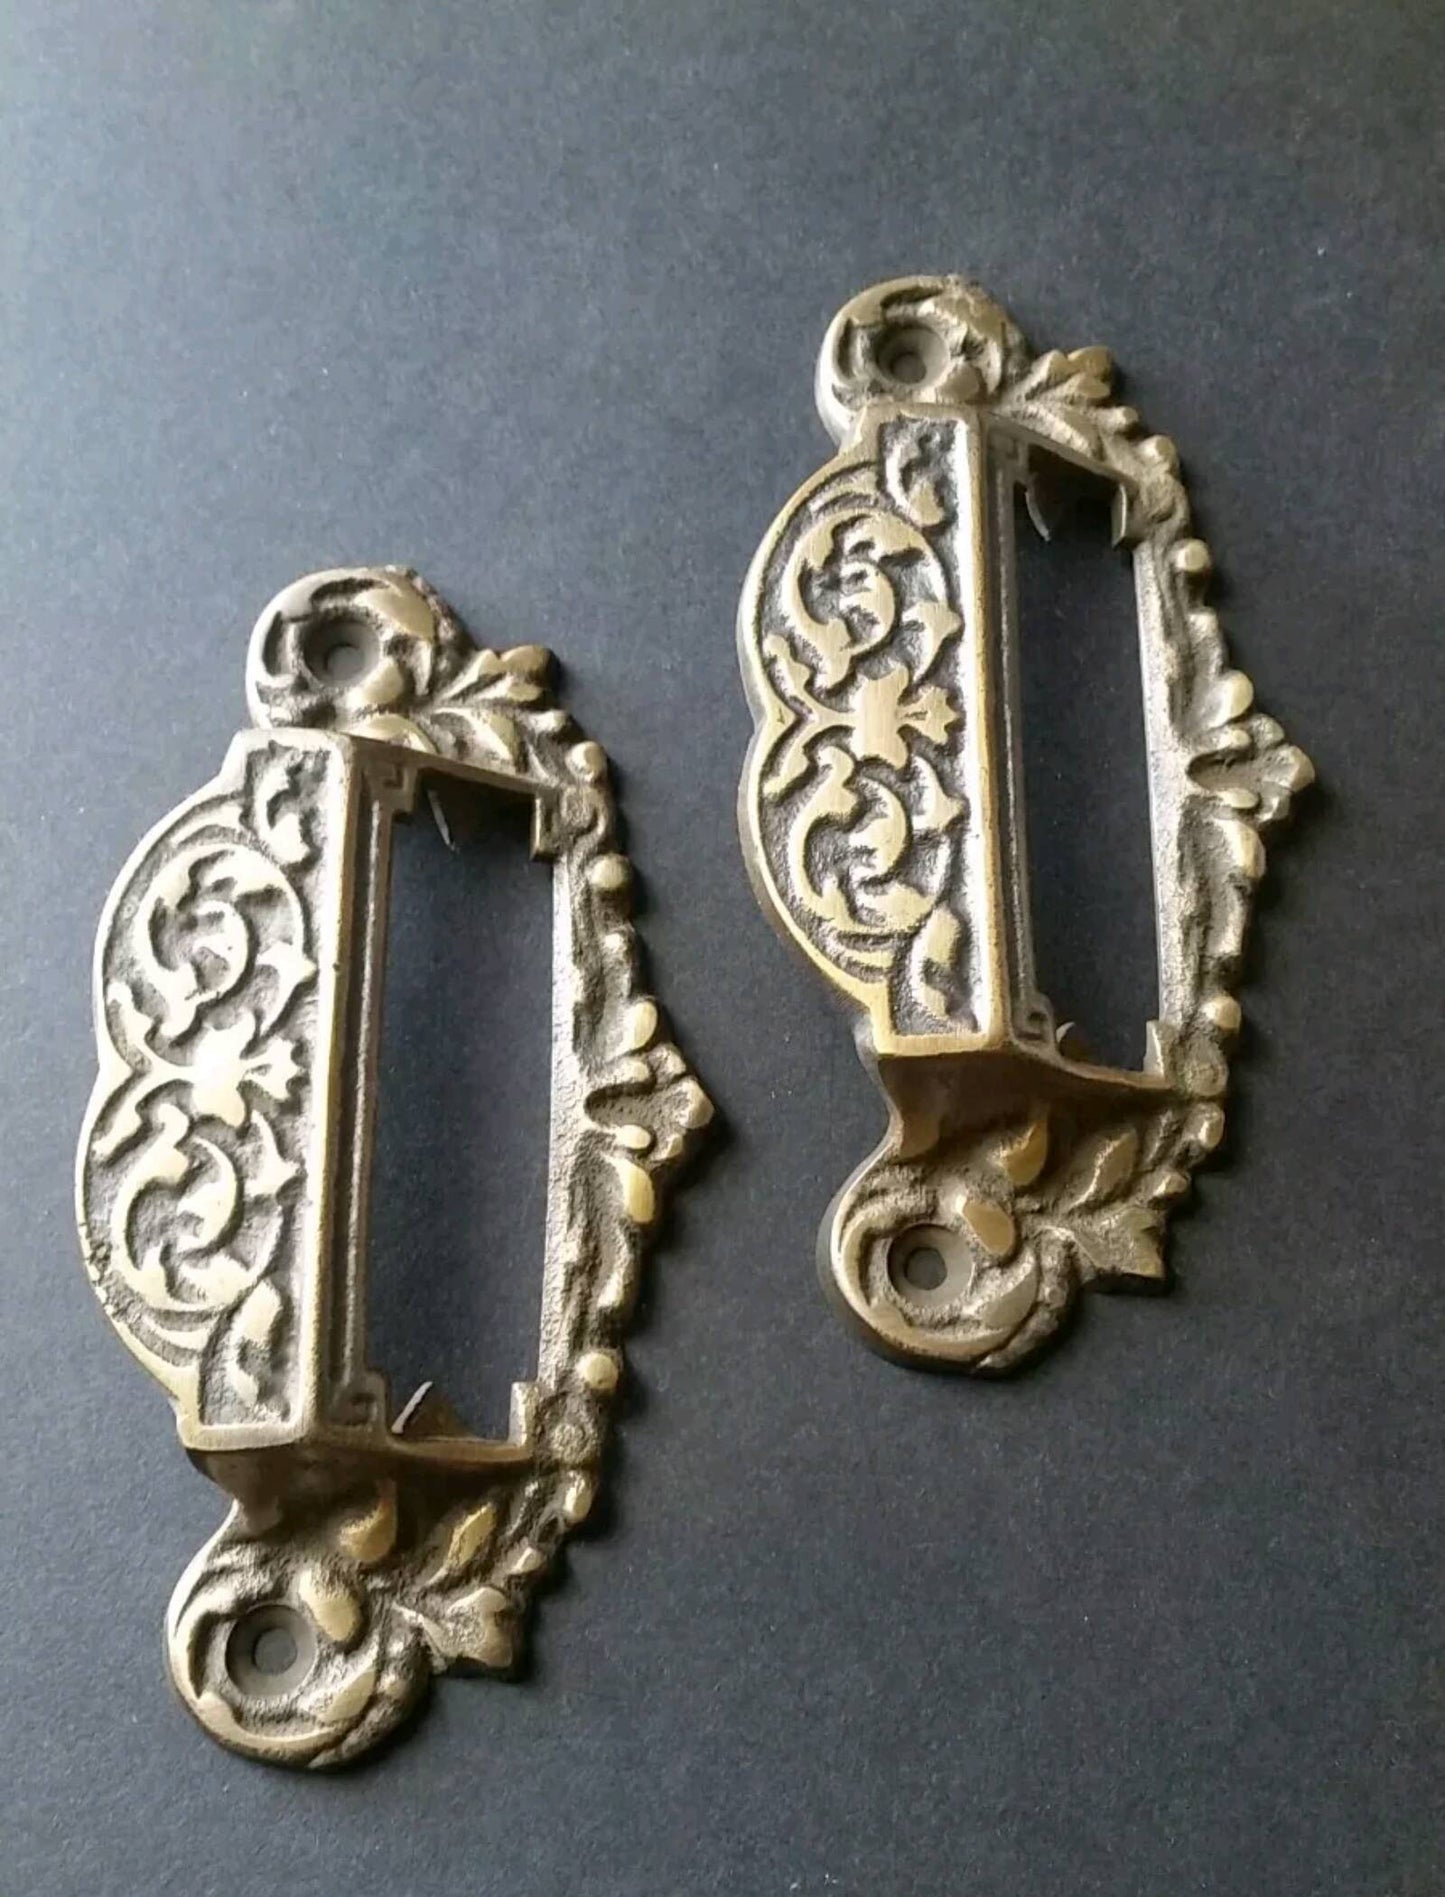 2 vintage antique brass Victorian Apothecary Bin Pull Handles with label holder slot 4-3/4" wide #A7